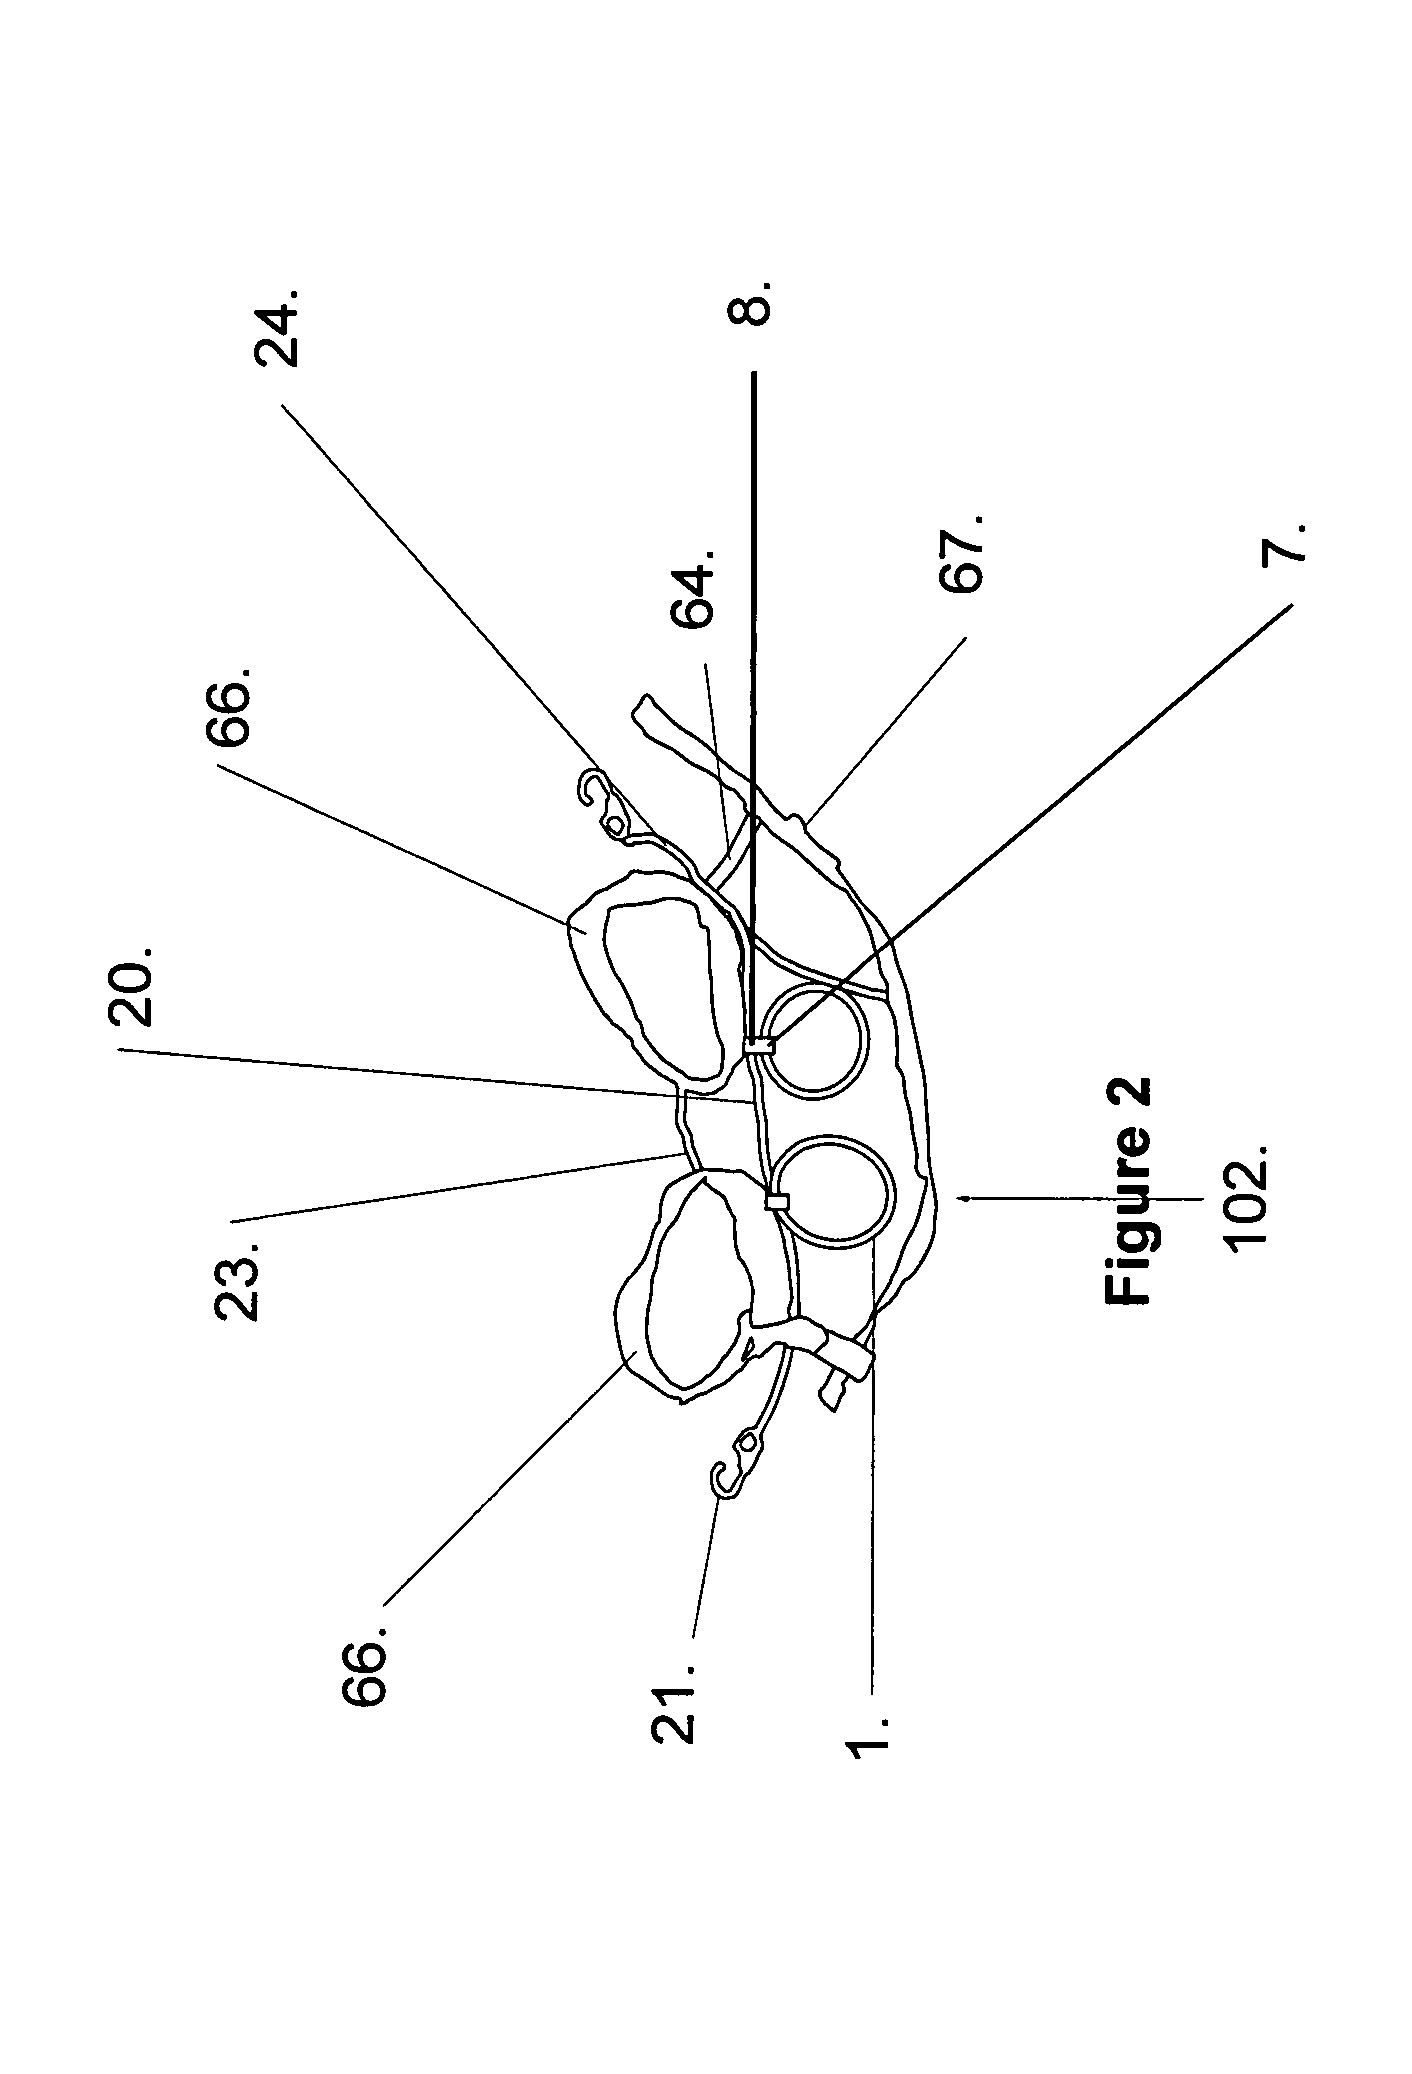 Apparatus for shifting weight from a runner to a wheeled frame